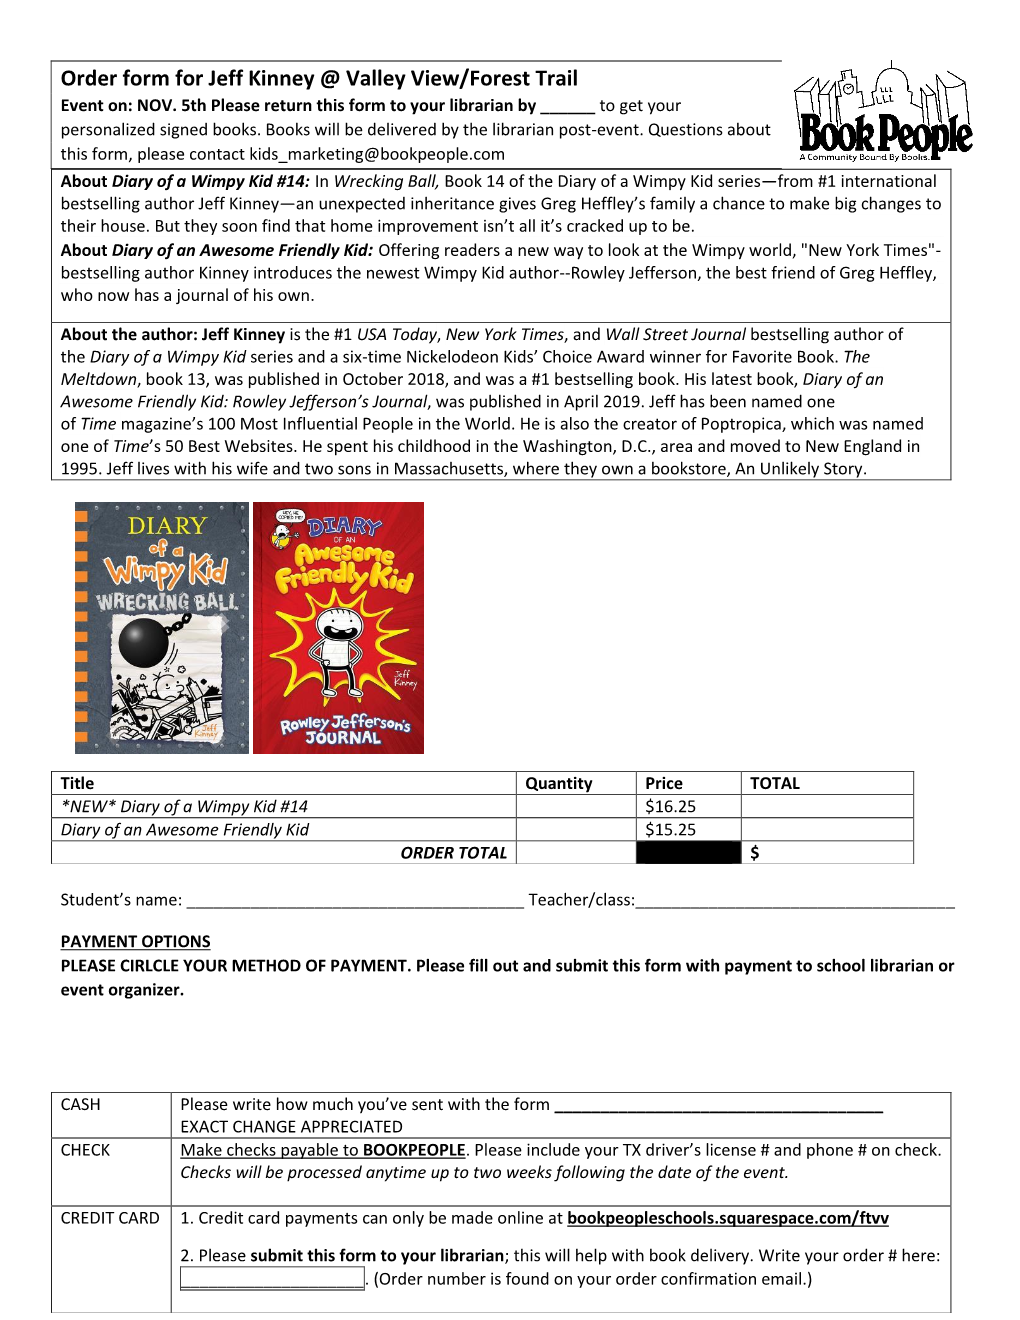 Order Form for Jeff Kinney @ Valley View/Forest Trail Event On: NOV